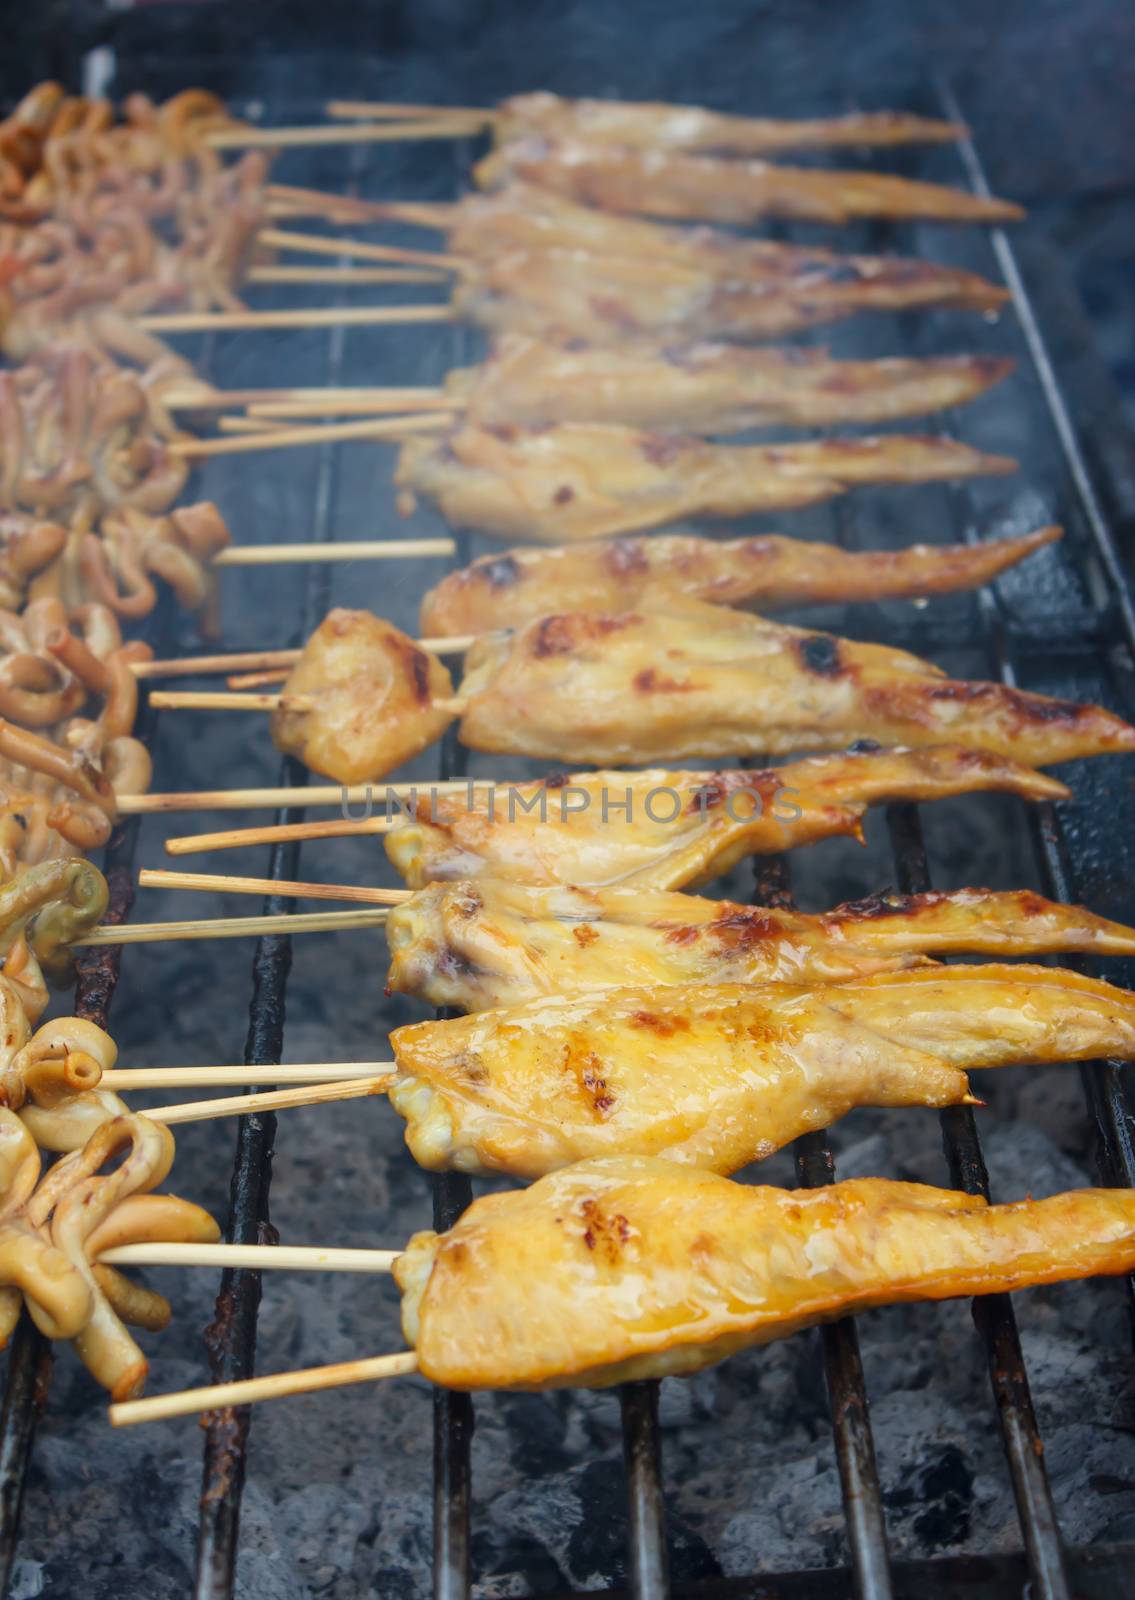 Chicken wing cooking on a hot grill stove (thai style)